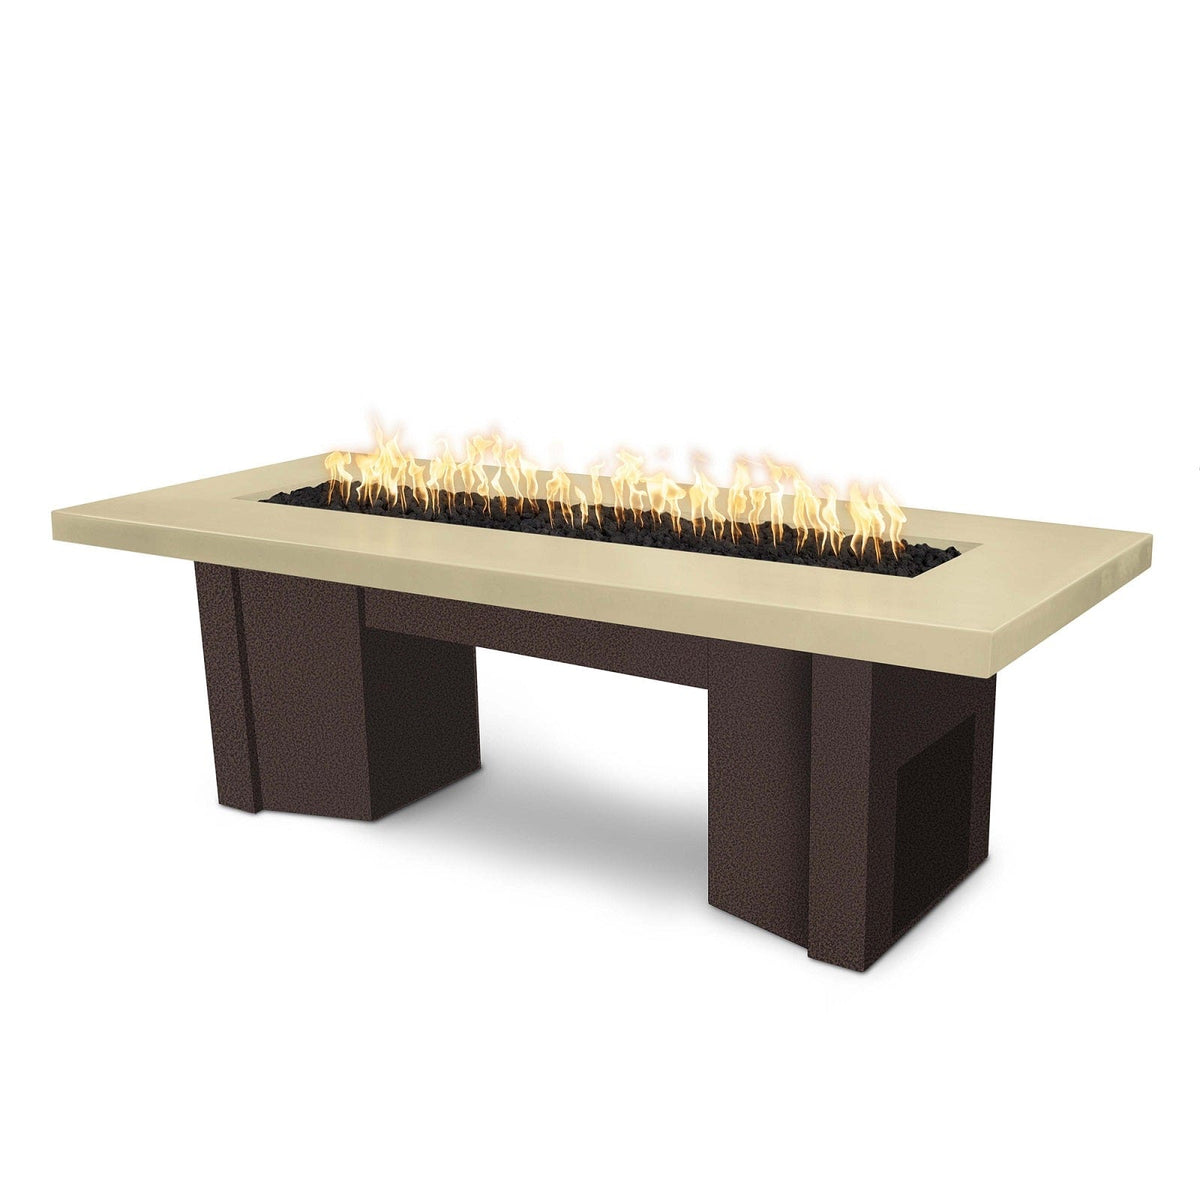 The Outdoor Plus Fire Features Vanilla (-VAN) / Copper Vein Powder Coated Steel (-CPV) The Outdoor Plus 78&quot; Alameda Fire Table Smooth Concrete in Liquid Propane - 110V Plug &amp; Play Electronic Ignition / OPT-ALMGFRC78EKIT-LP